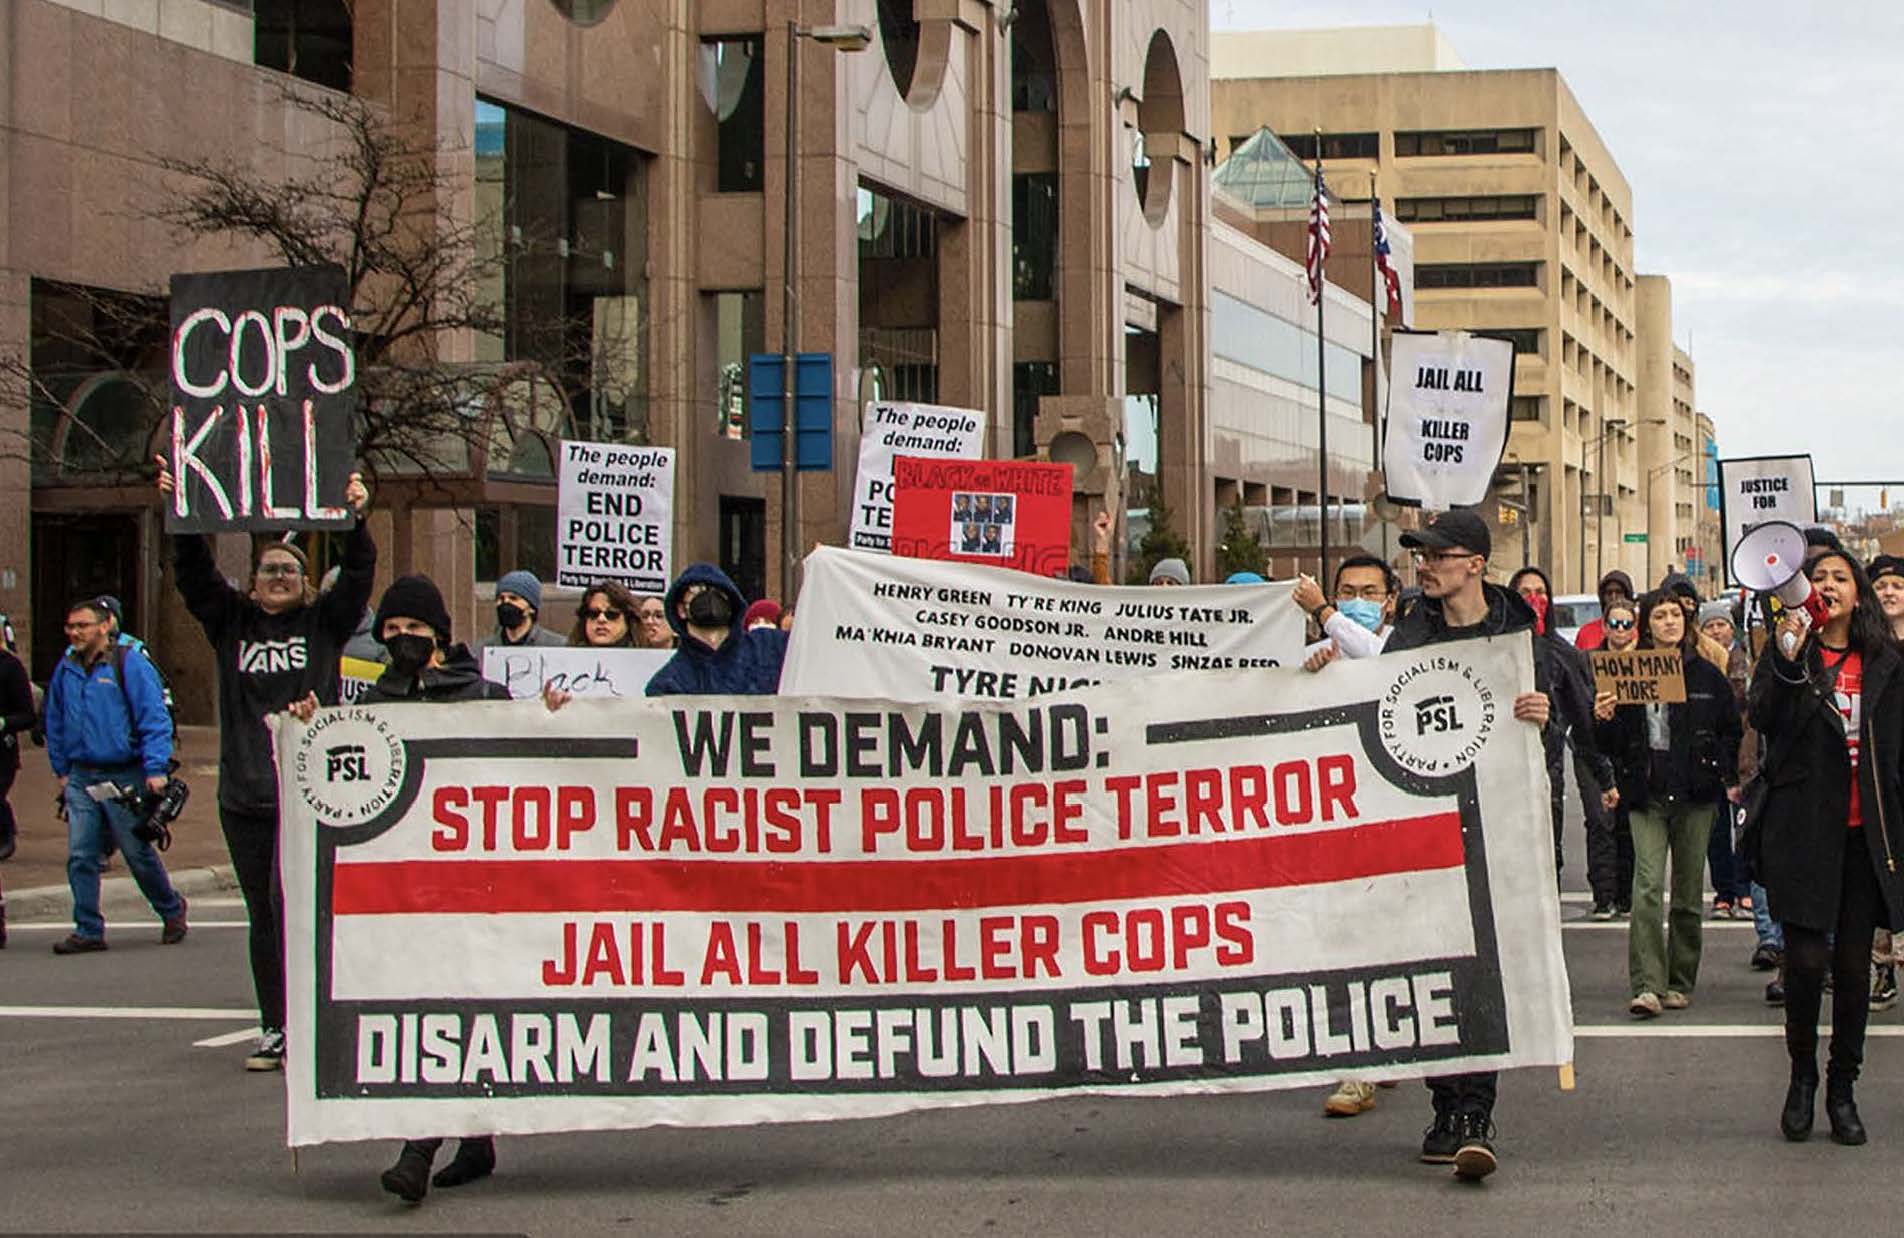 Marches in a Columbus, Ohio event carry a banner reading "Stop Racist Police Terror, "Jail All Killer Cops" and "Disarm and Defund the Police" in red and black letters on a white background.